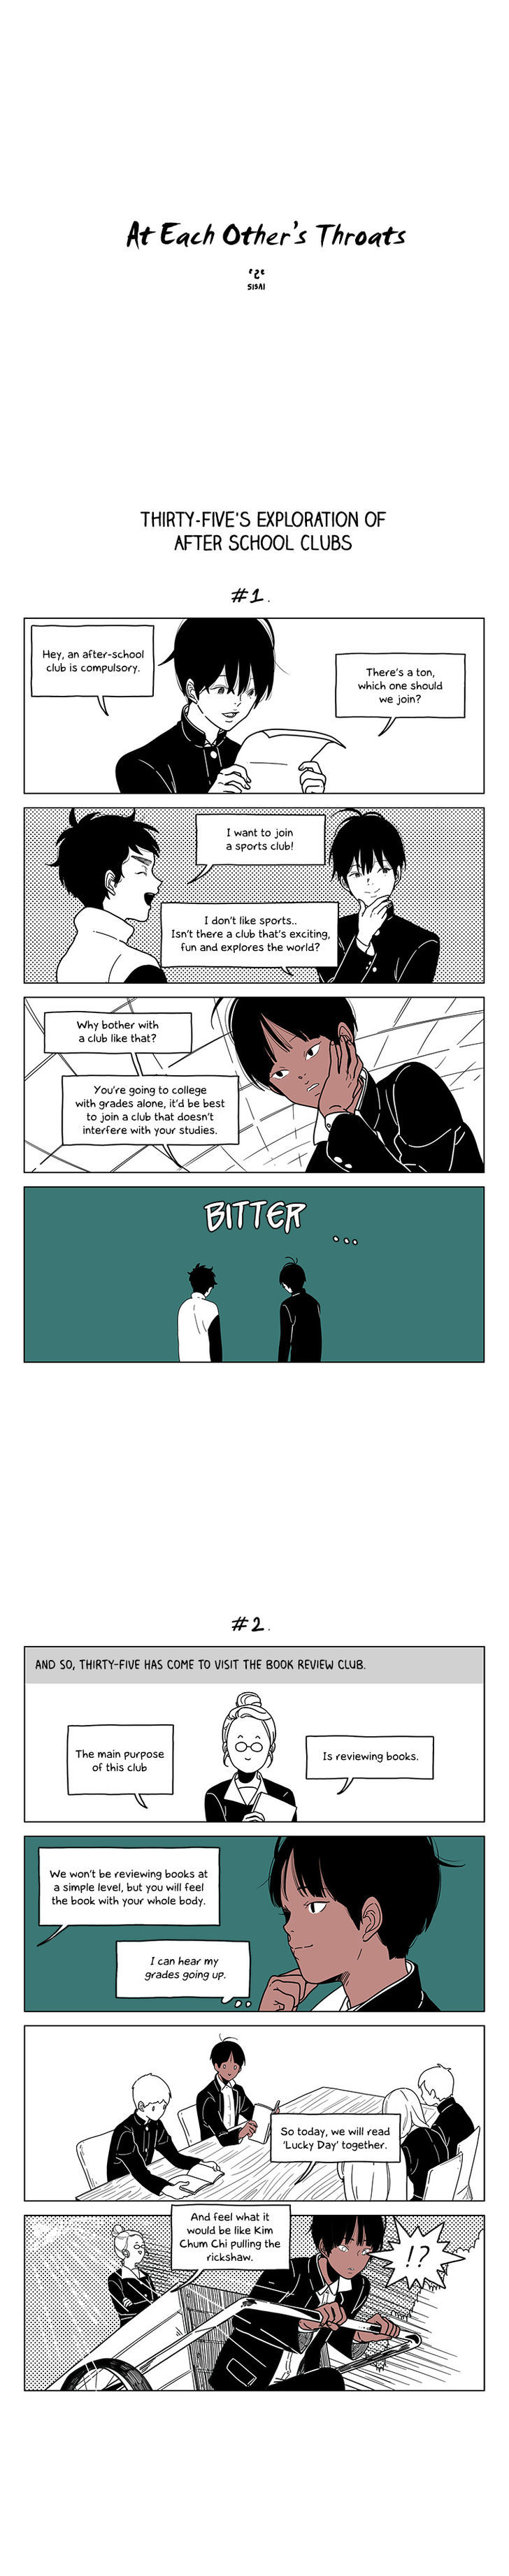 At Each Other's Throats - Page 1